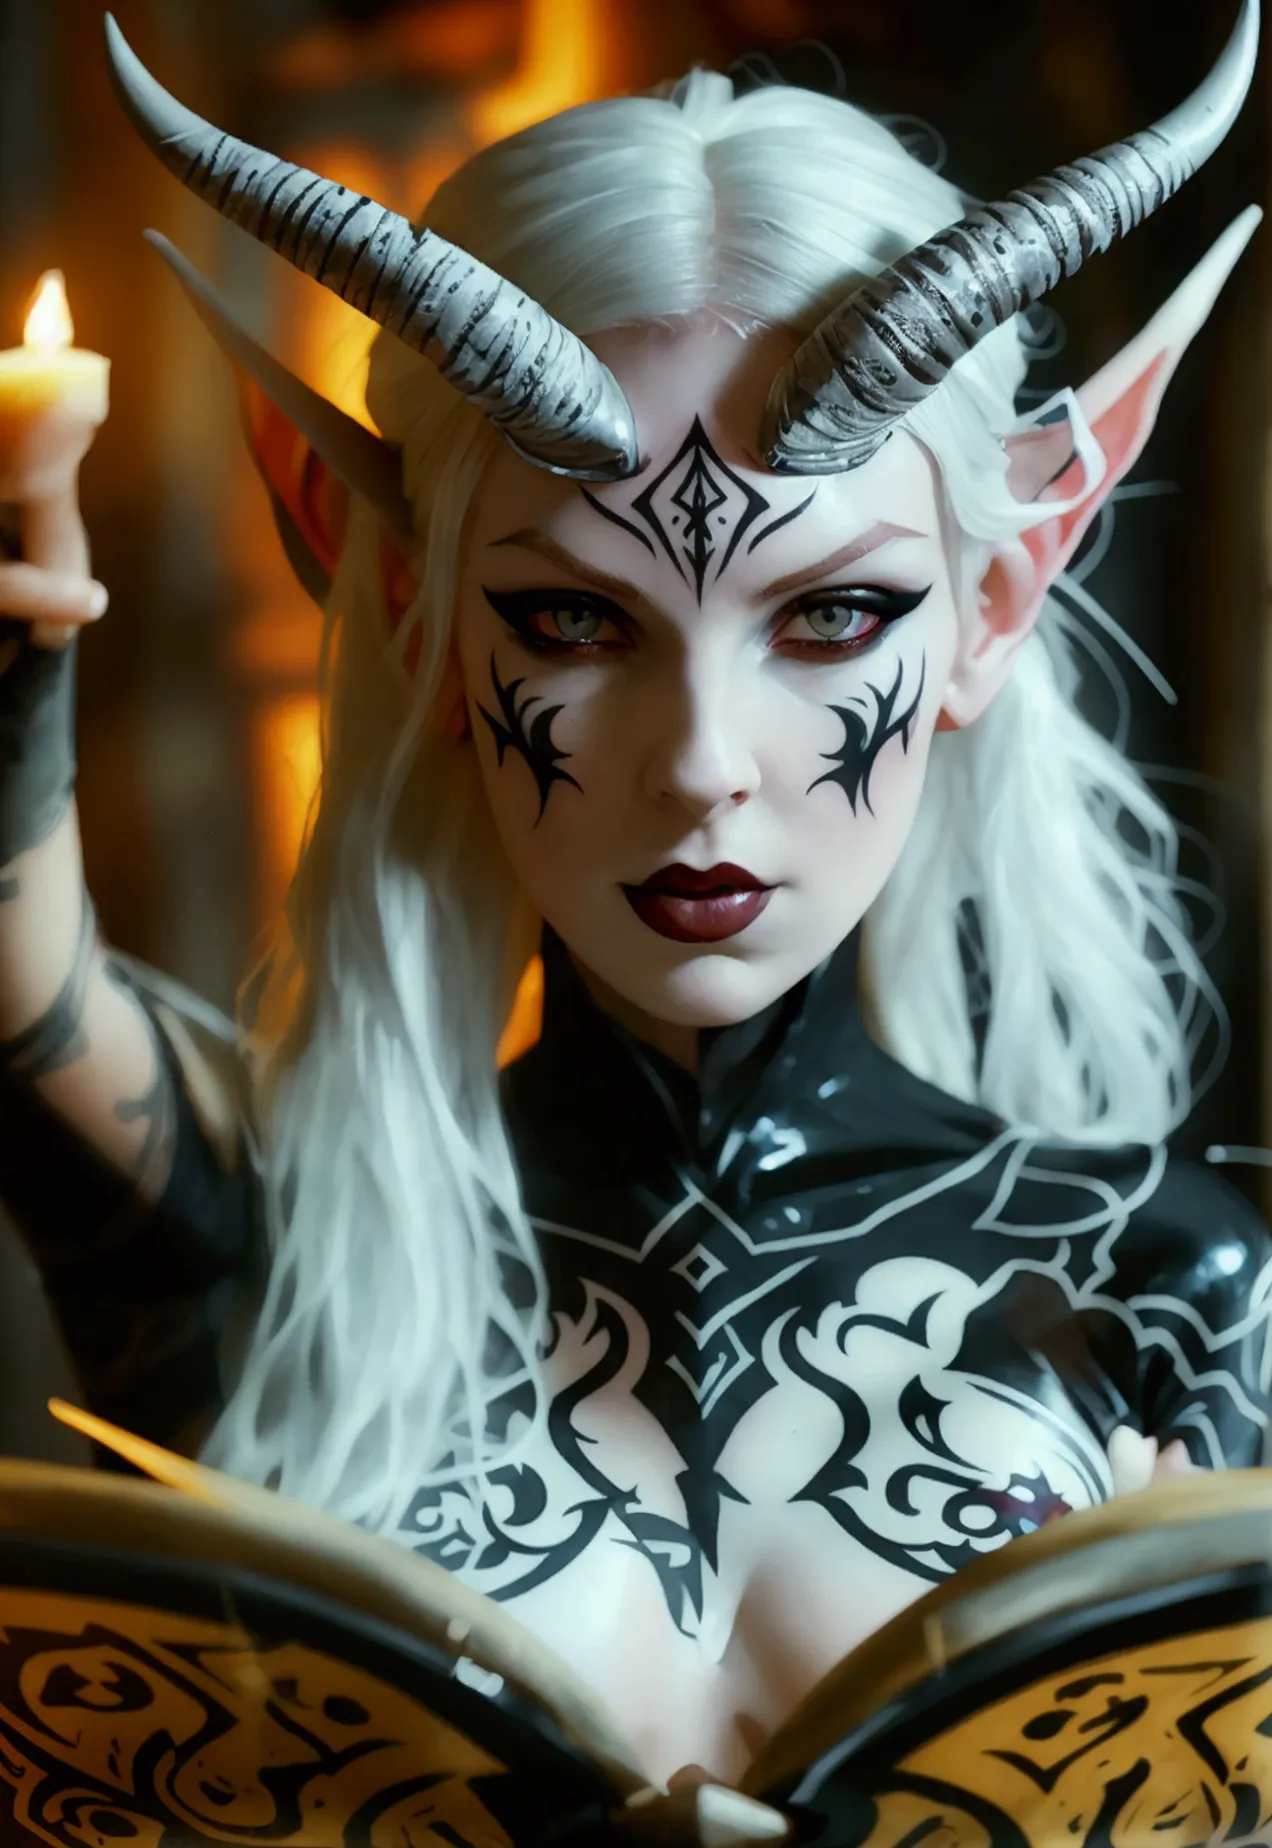 A dark elf (cute woman, pale white skin, large pointy ears, blood red eyes, large evil tattoos, sheer black lingerie), she is st...